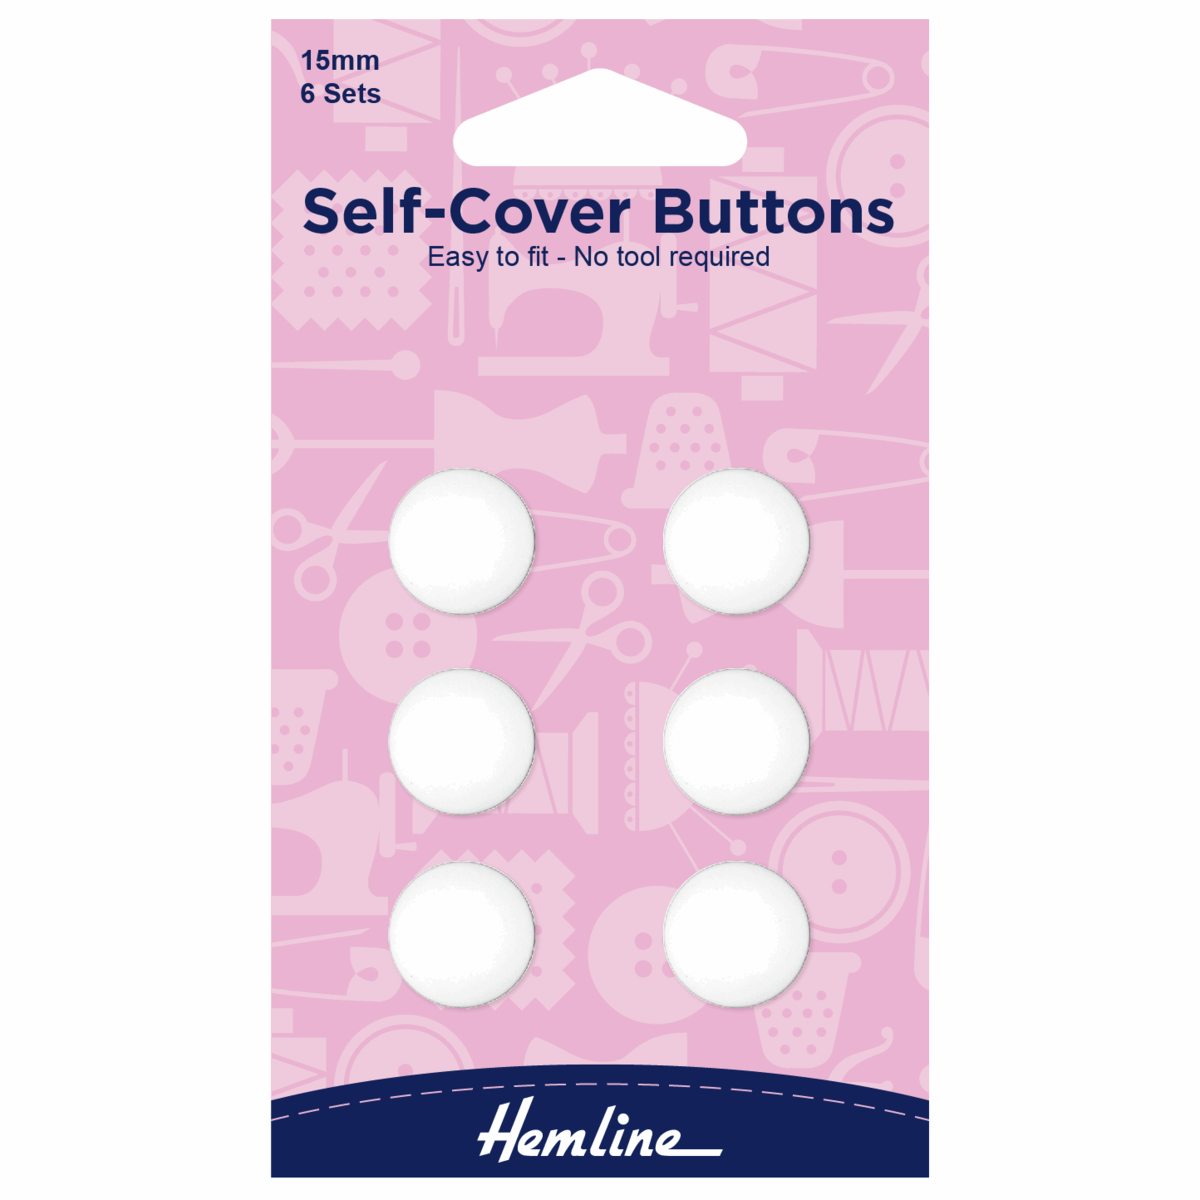 Self-Cover Buttons: Nylon: 15mm